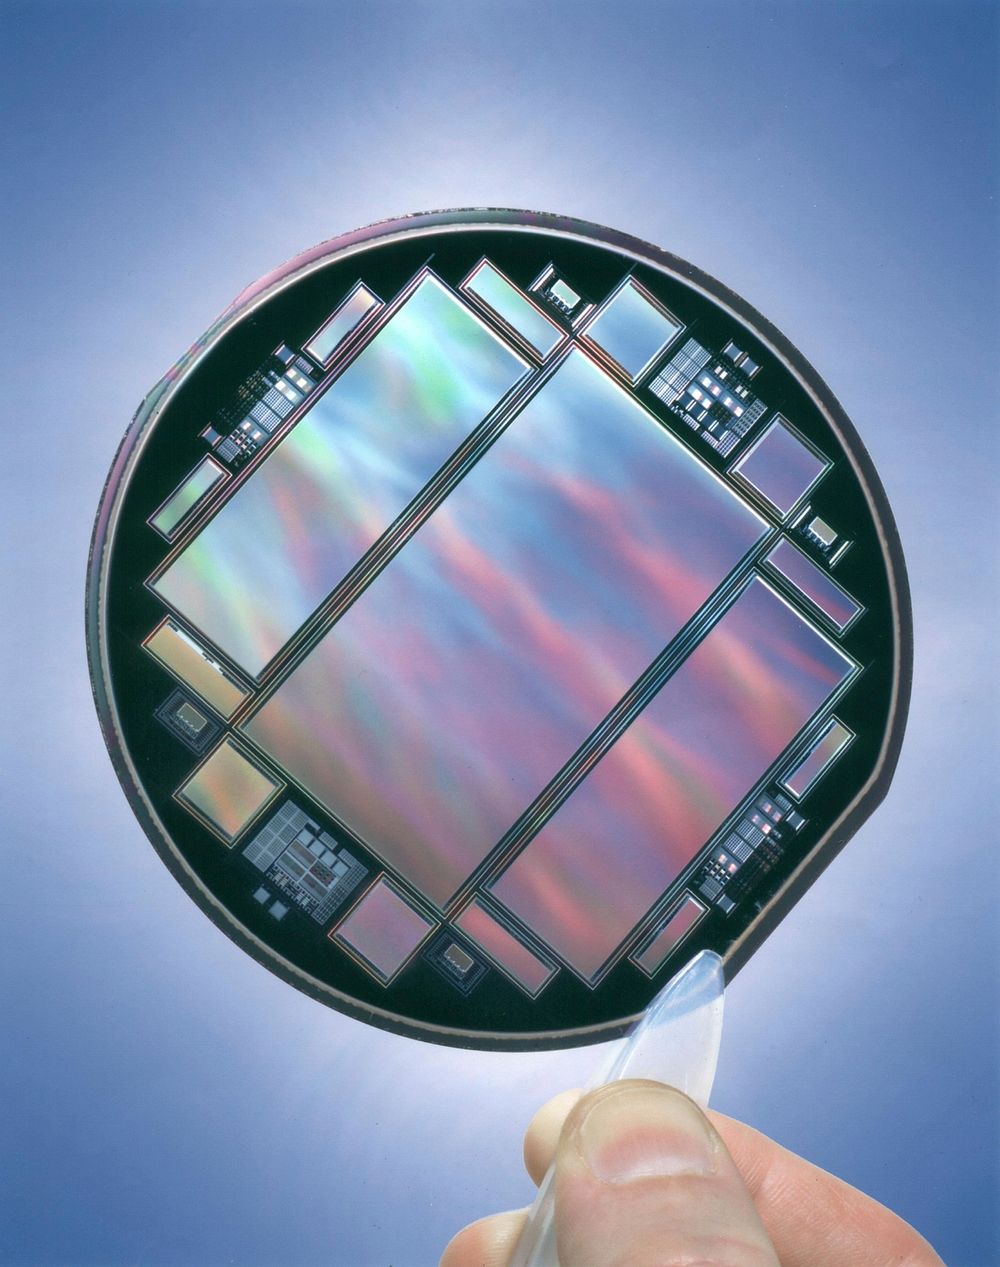 A 300-micrometer-thick charge-coupled device (ccd) with more than 21 million pixels.